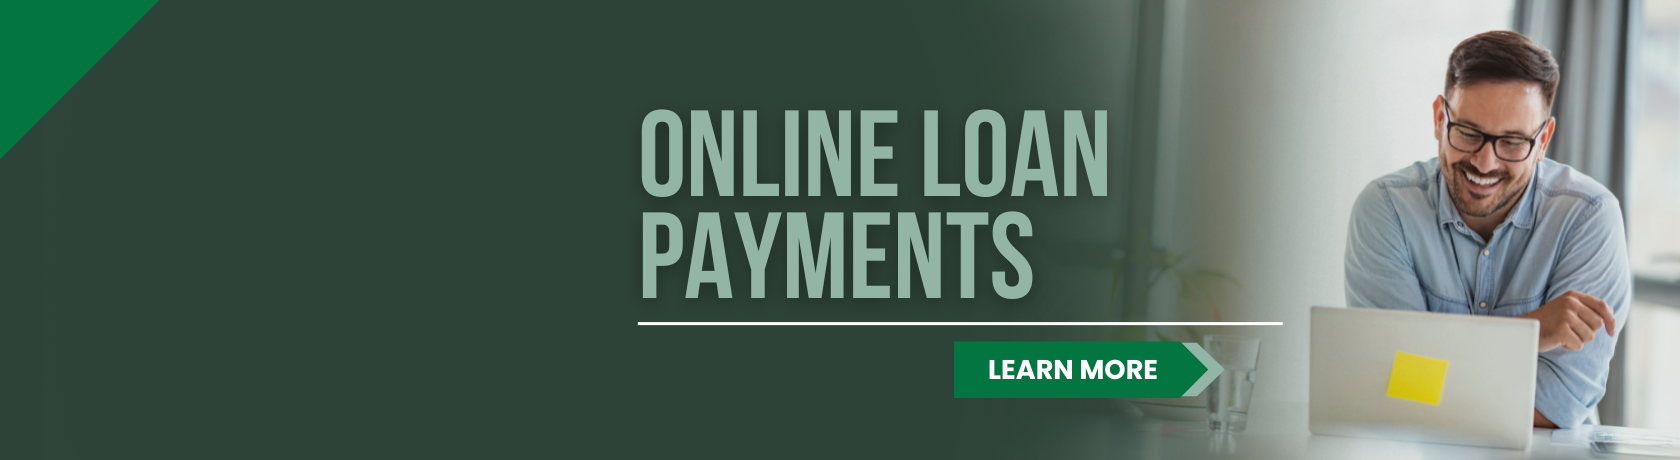 Online Loan Payments. Learn More